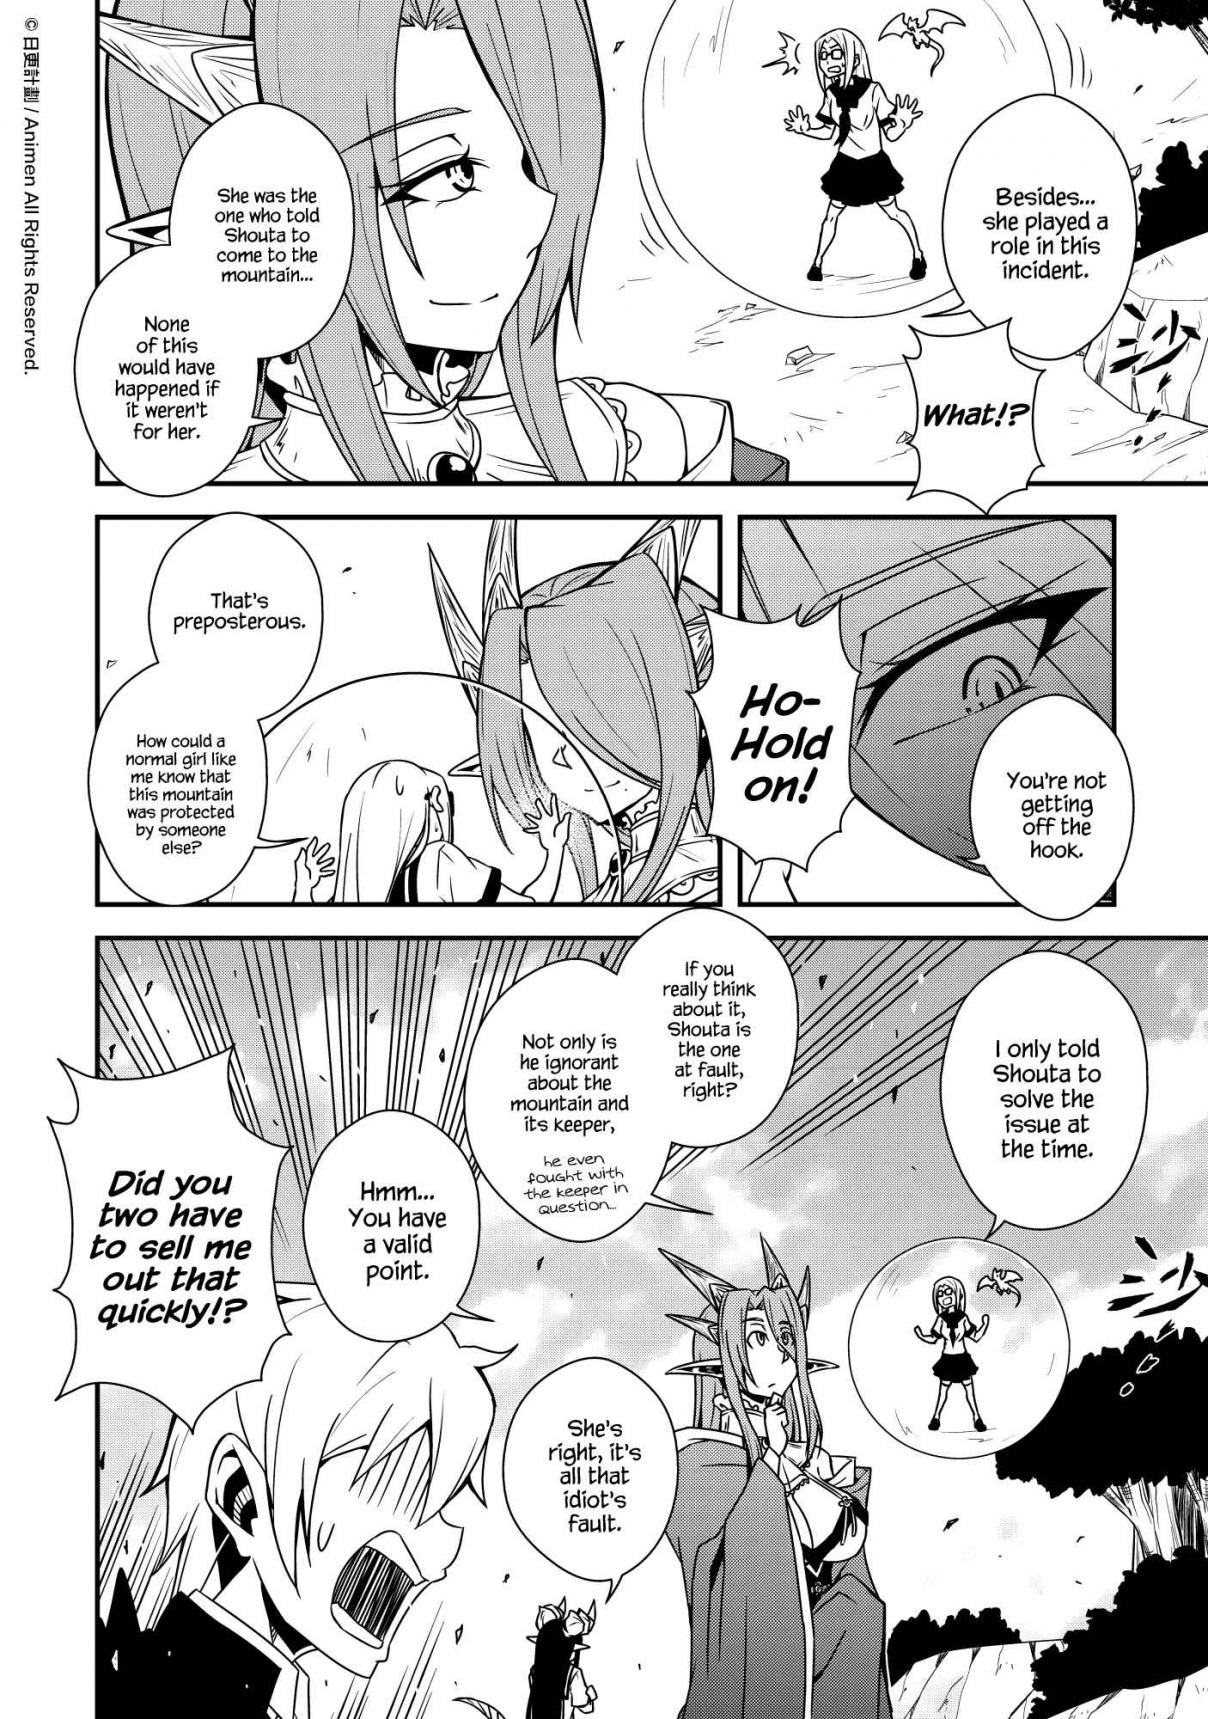 The Girl With Horns Vol. 1 Ch. 9 The Past and Future